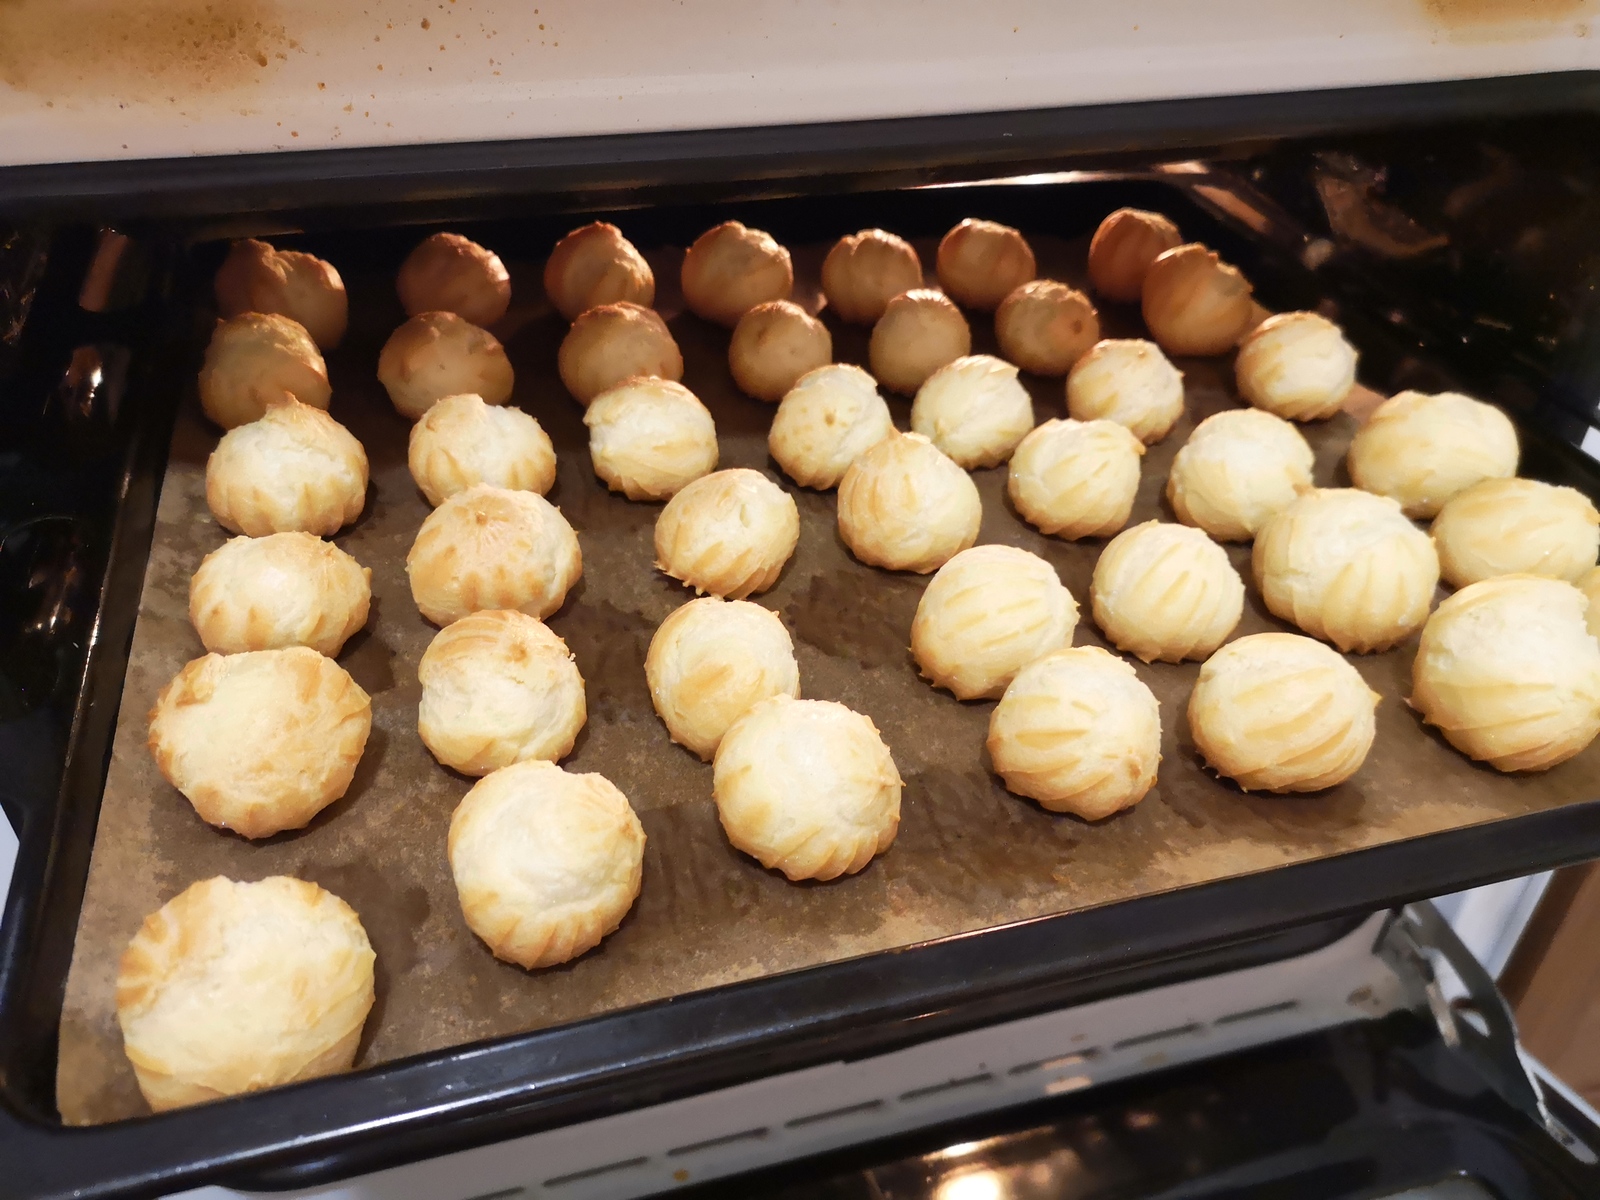 Filling for profiteroles. - My, Cook at home, Food, Cooking, Profiteroles, Longpost, Recipe, Snack